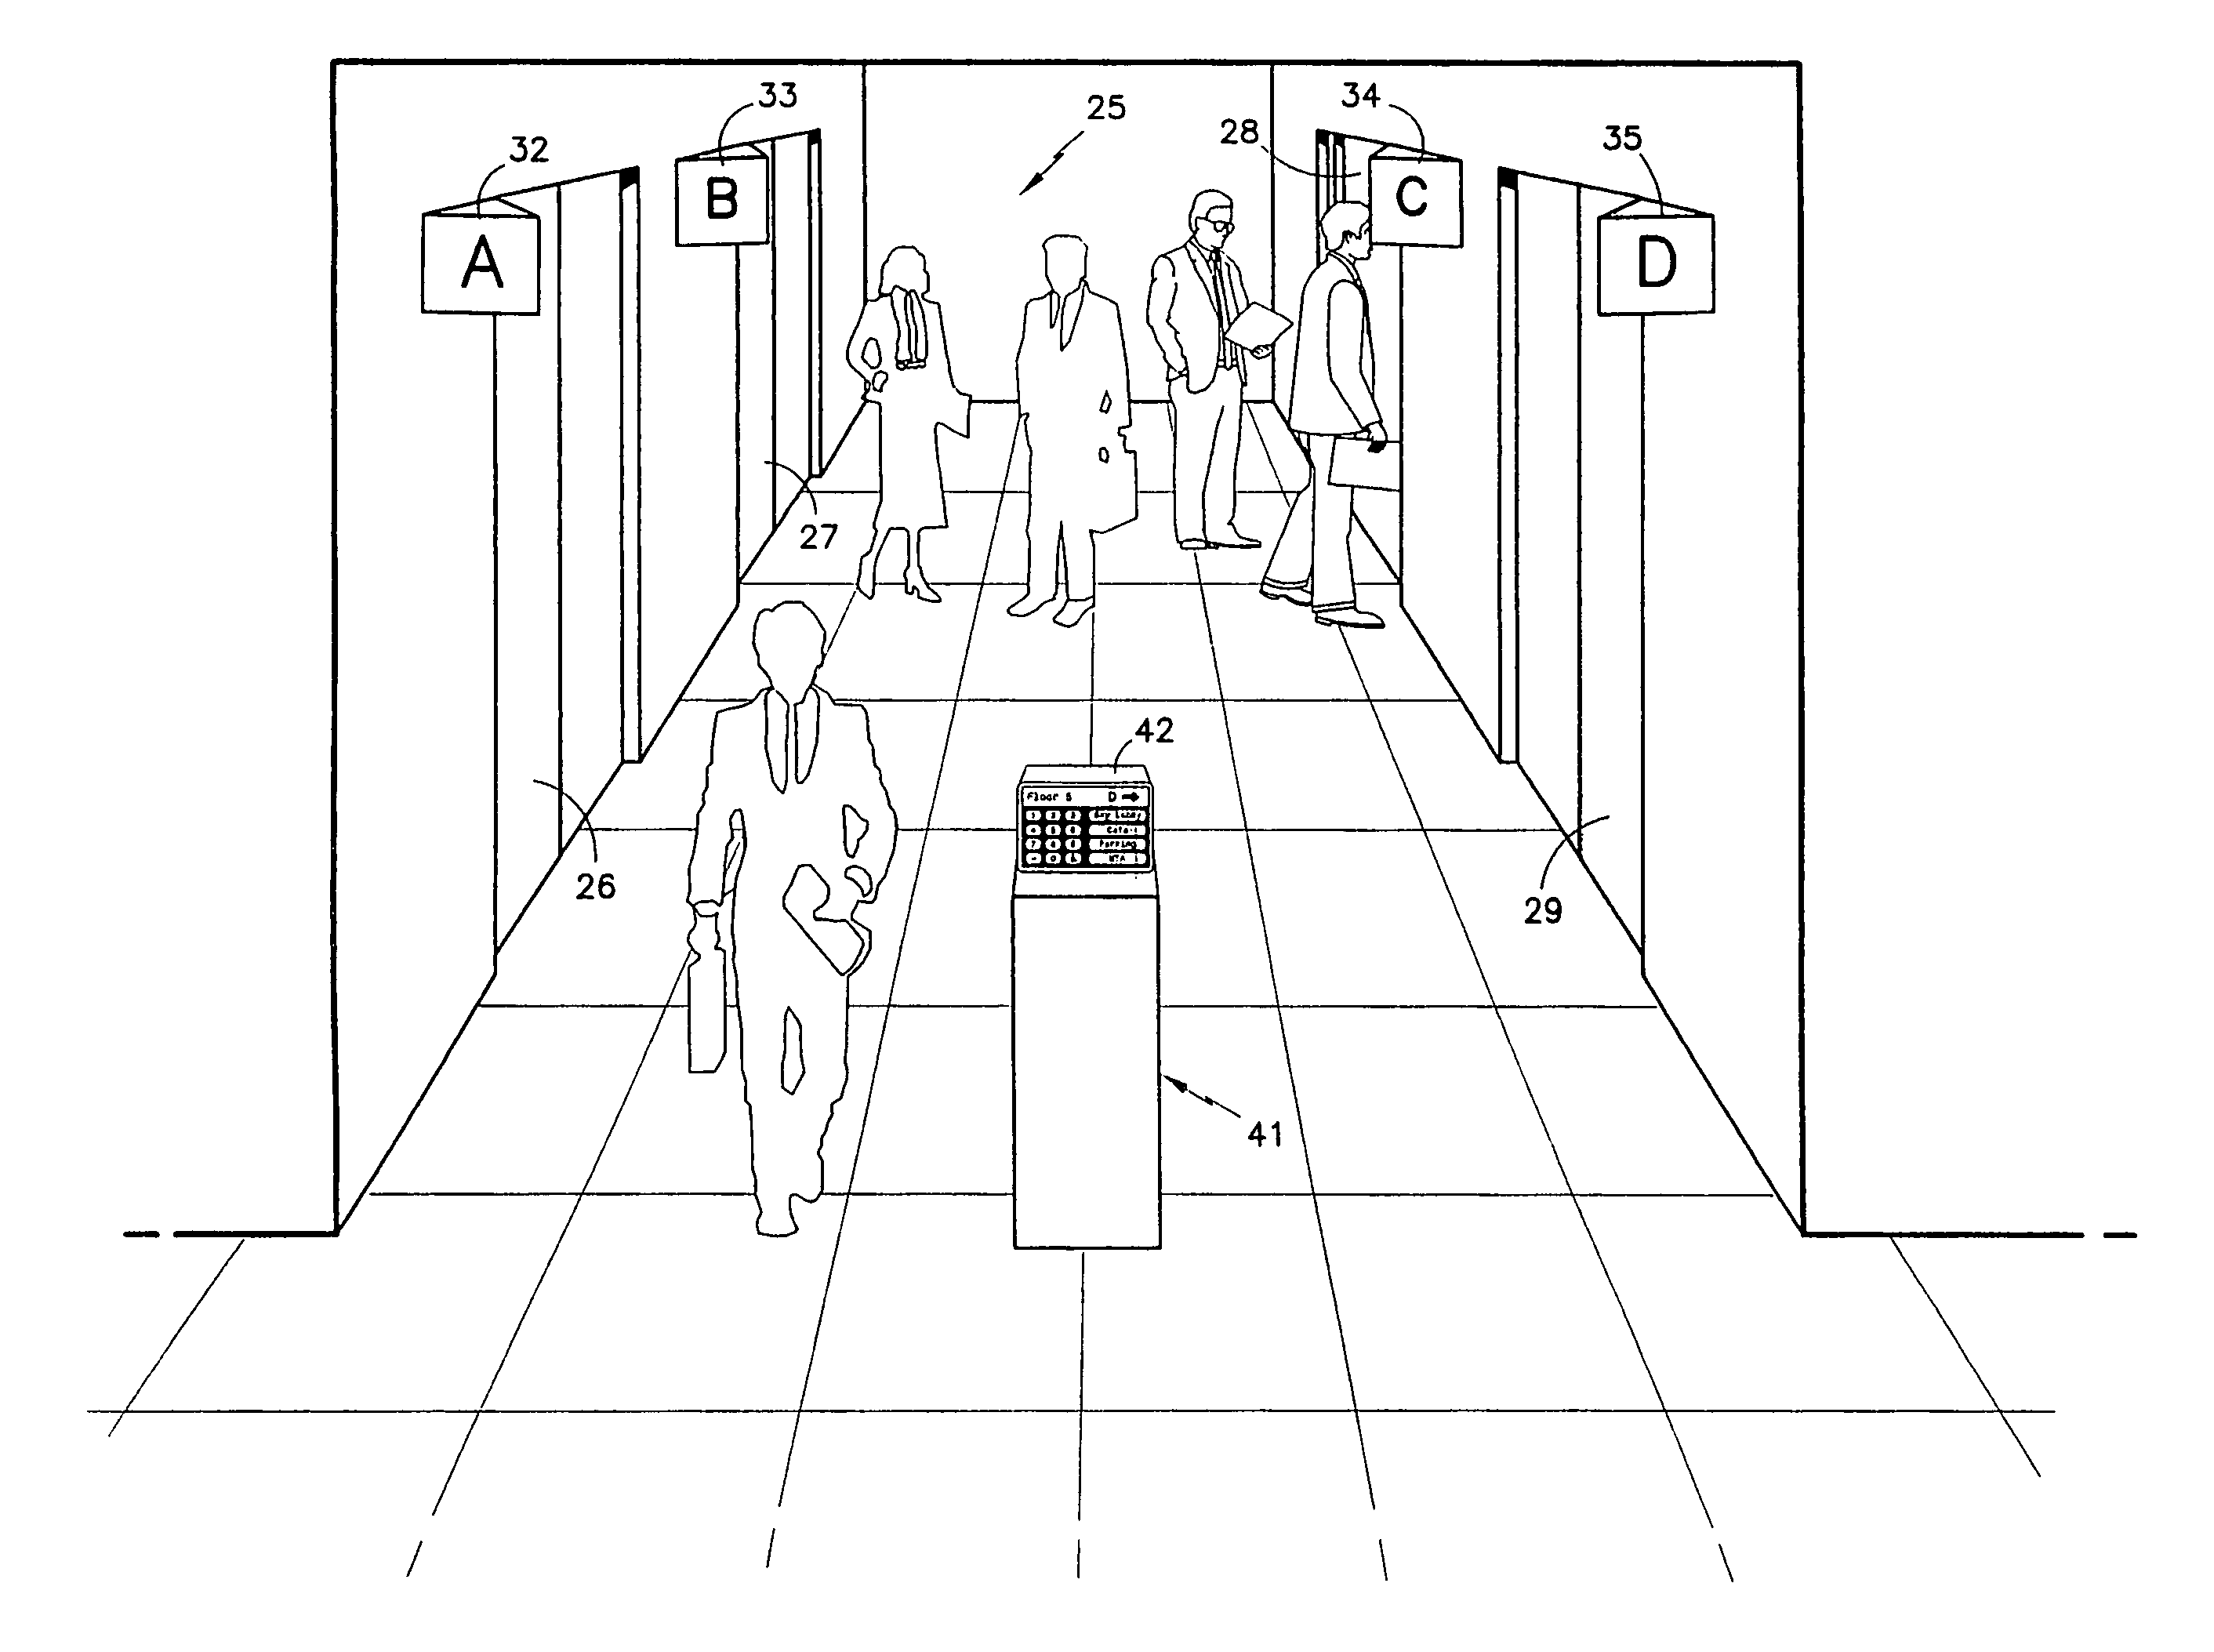 Elevator hall call system including a programmable adaptable touch screen